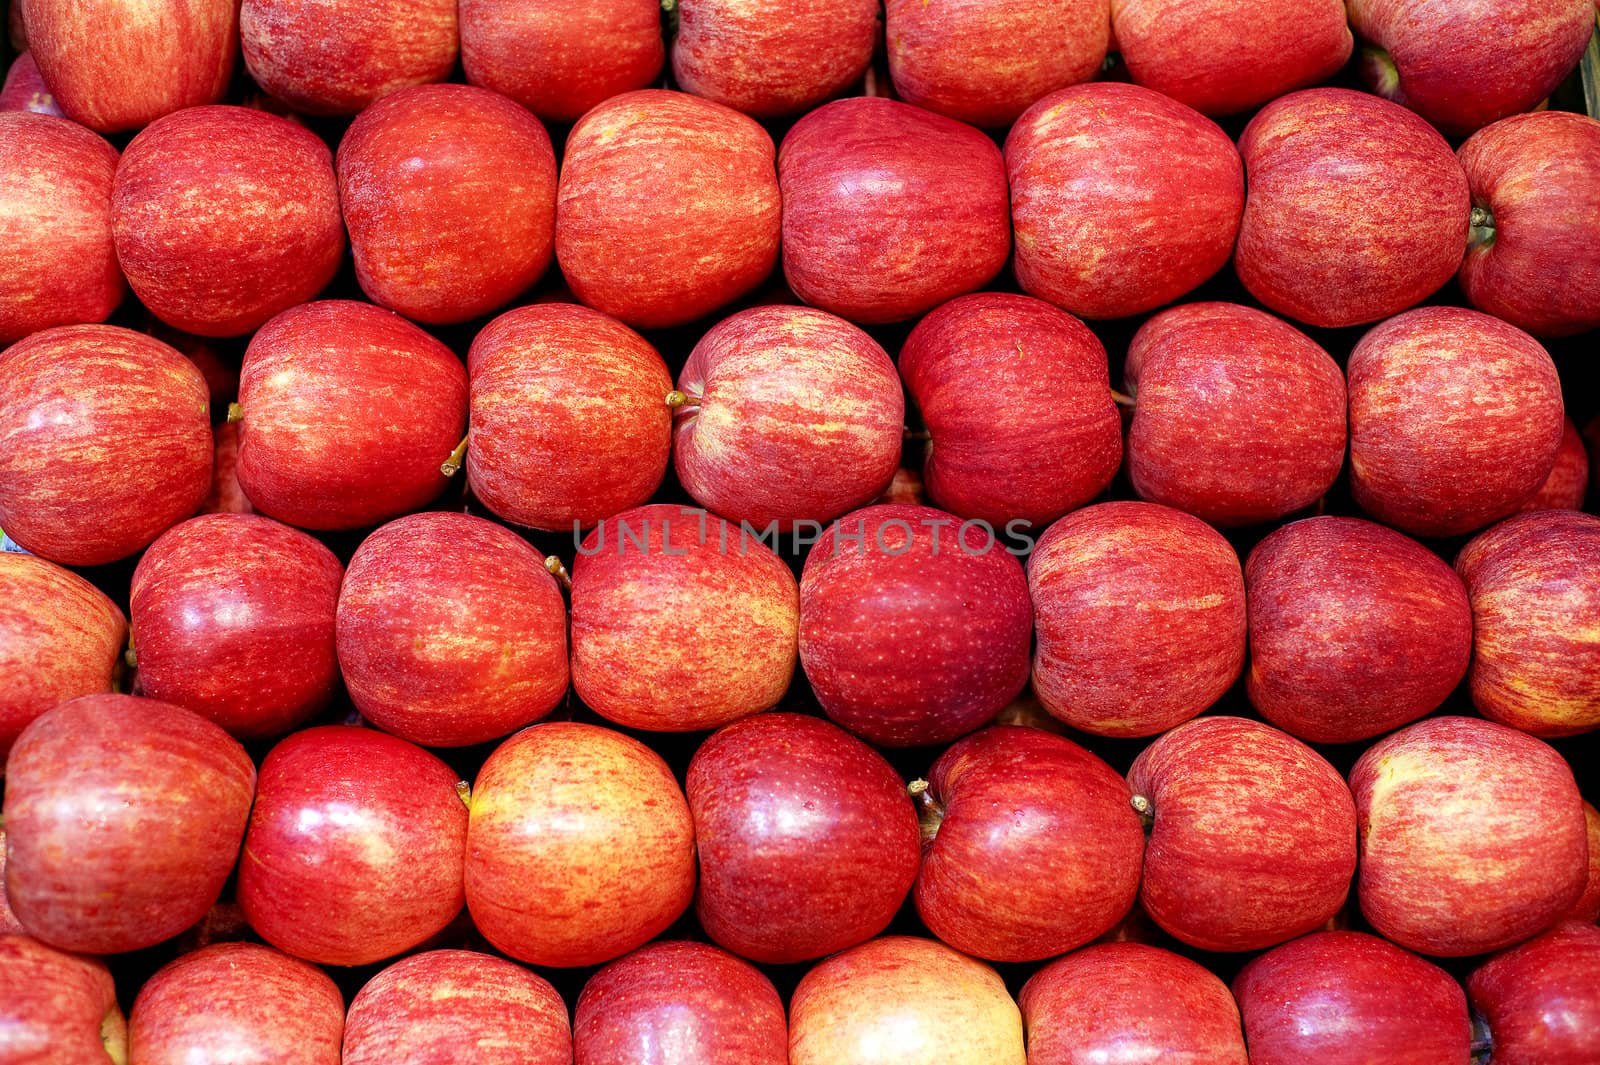 Apples neatly stacked in rows on farm stand